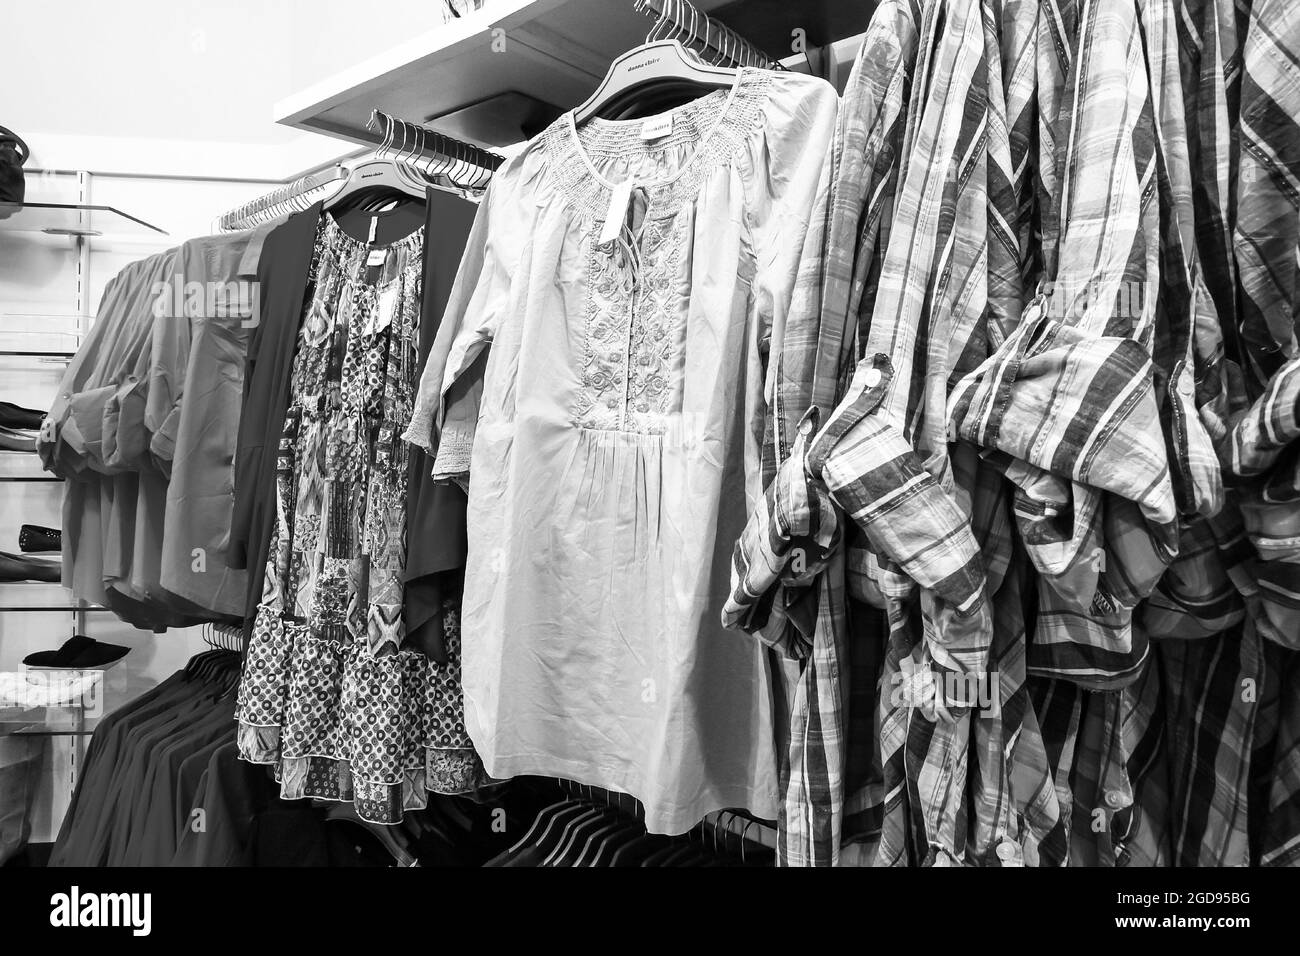 JOHANNESBURG, SOUTH AFRICA - Jan 06, 2021: A grayscale of apparel in Up-Market retail store in Johannesburg, South Africa Stock Photo